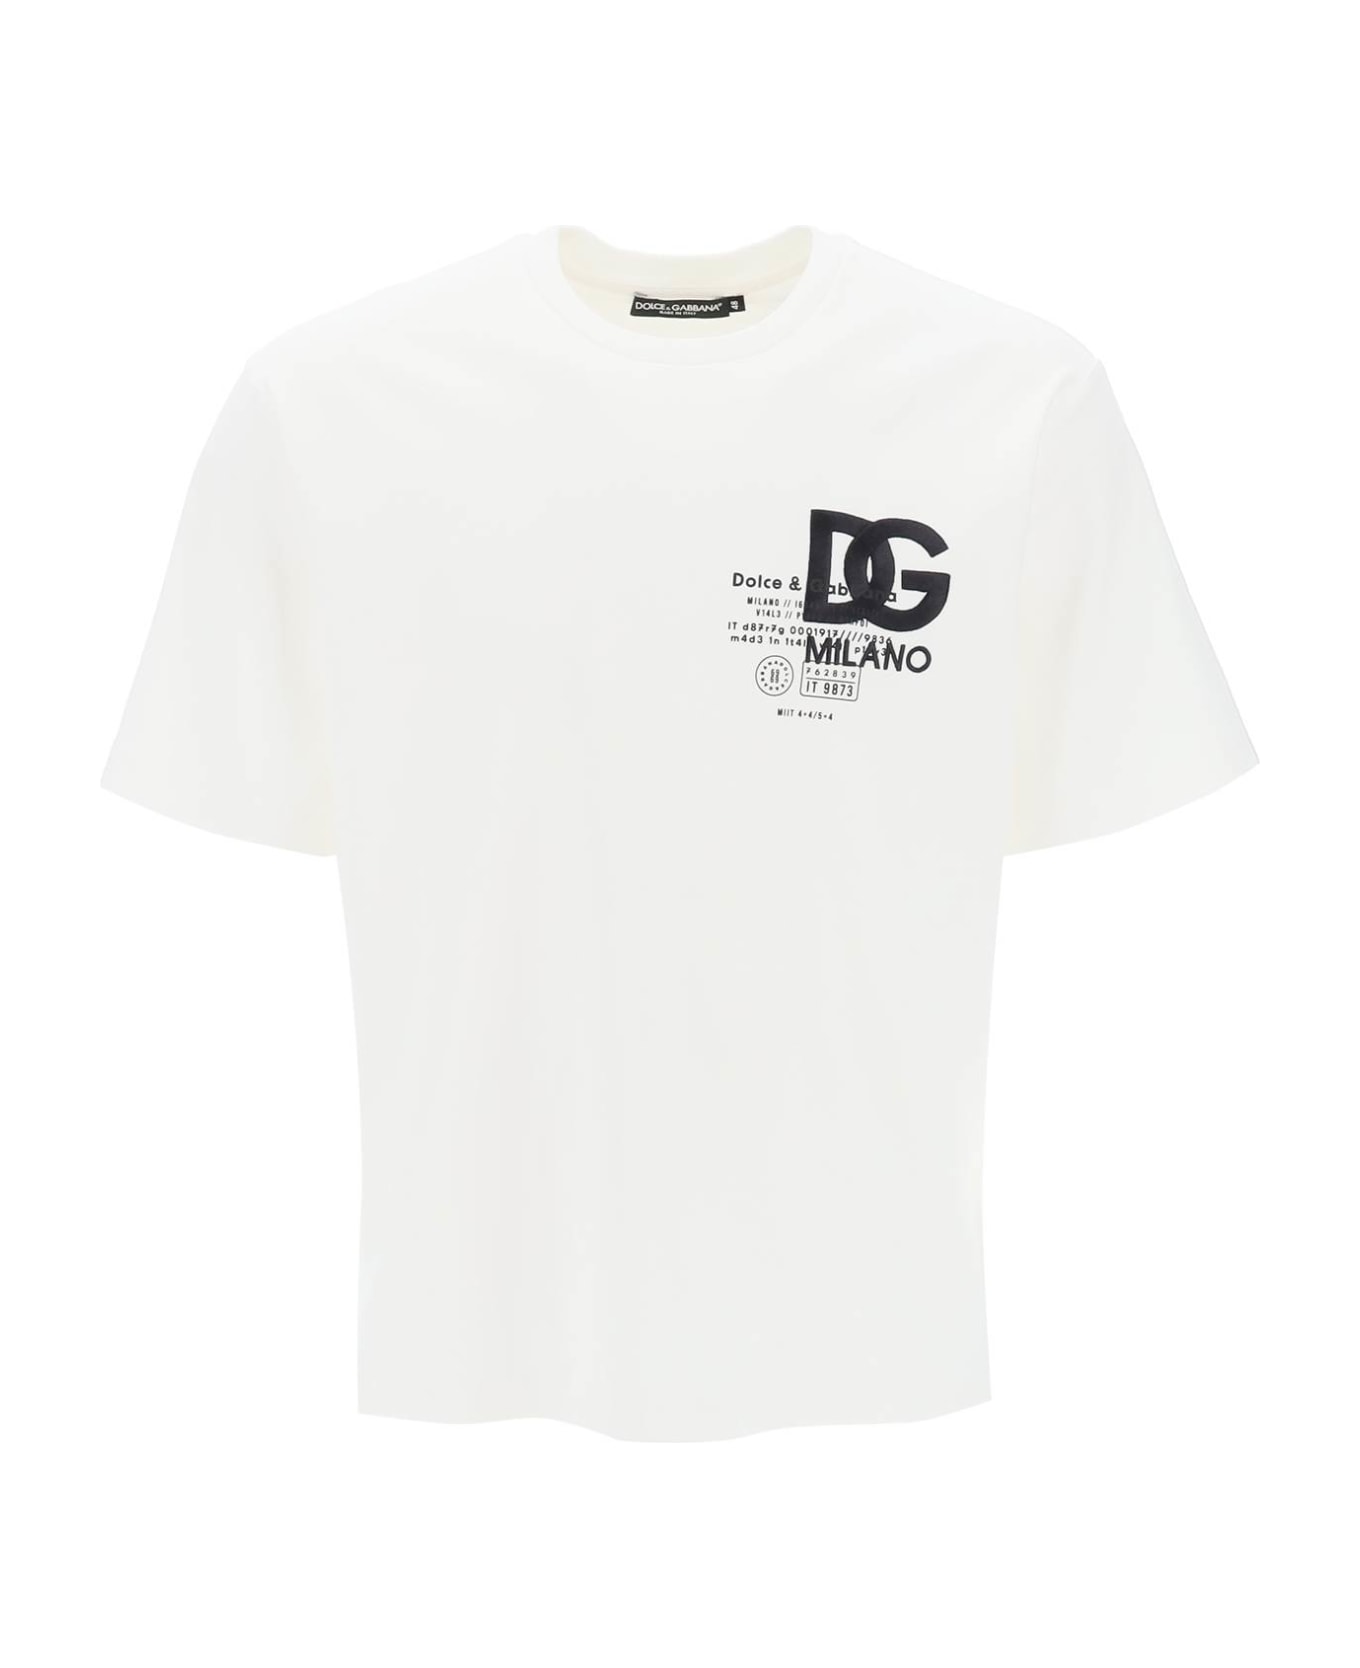 Dolce & Gabbana T-shirt With Embroidery And Prints - Bianco シャツ